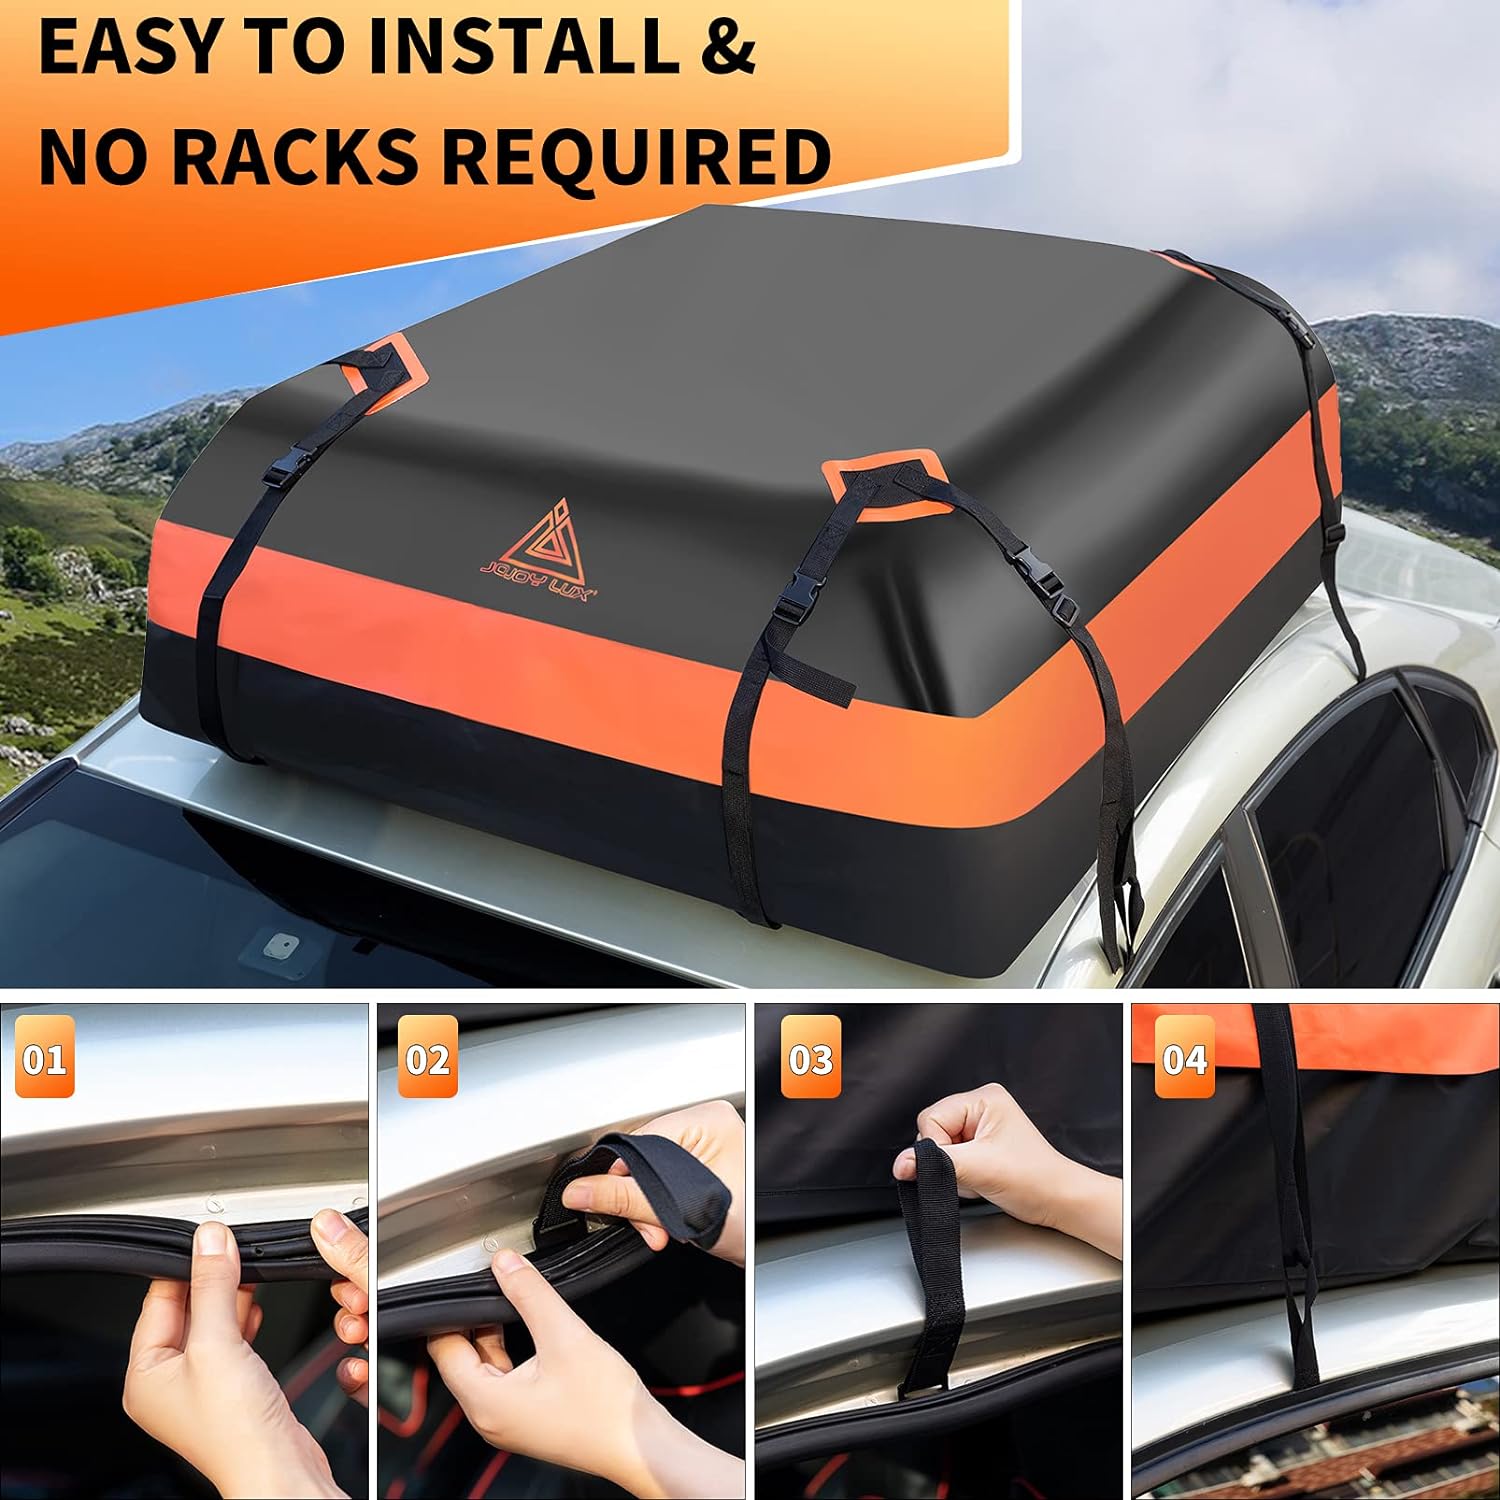 JOJOY LUX Car Rooftop Cargo Carrier Bag, 15 Cubic Feet Waterproof Heavy Duty 720D Car Roof Luggage Bag for All Vehicle with/Without Racks